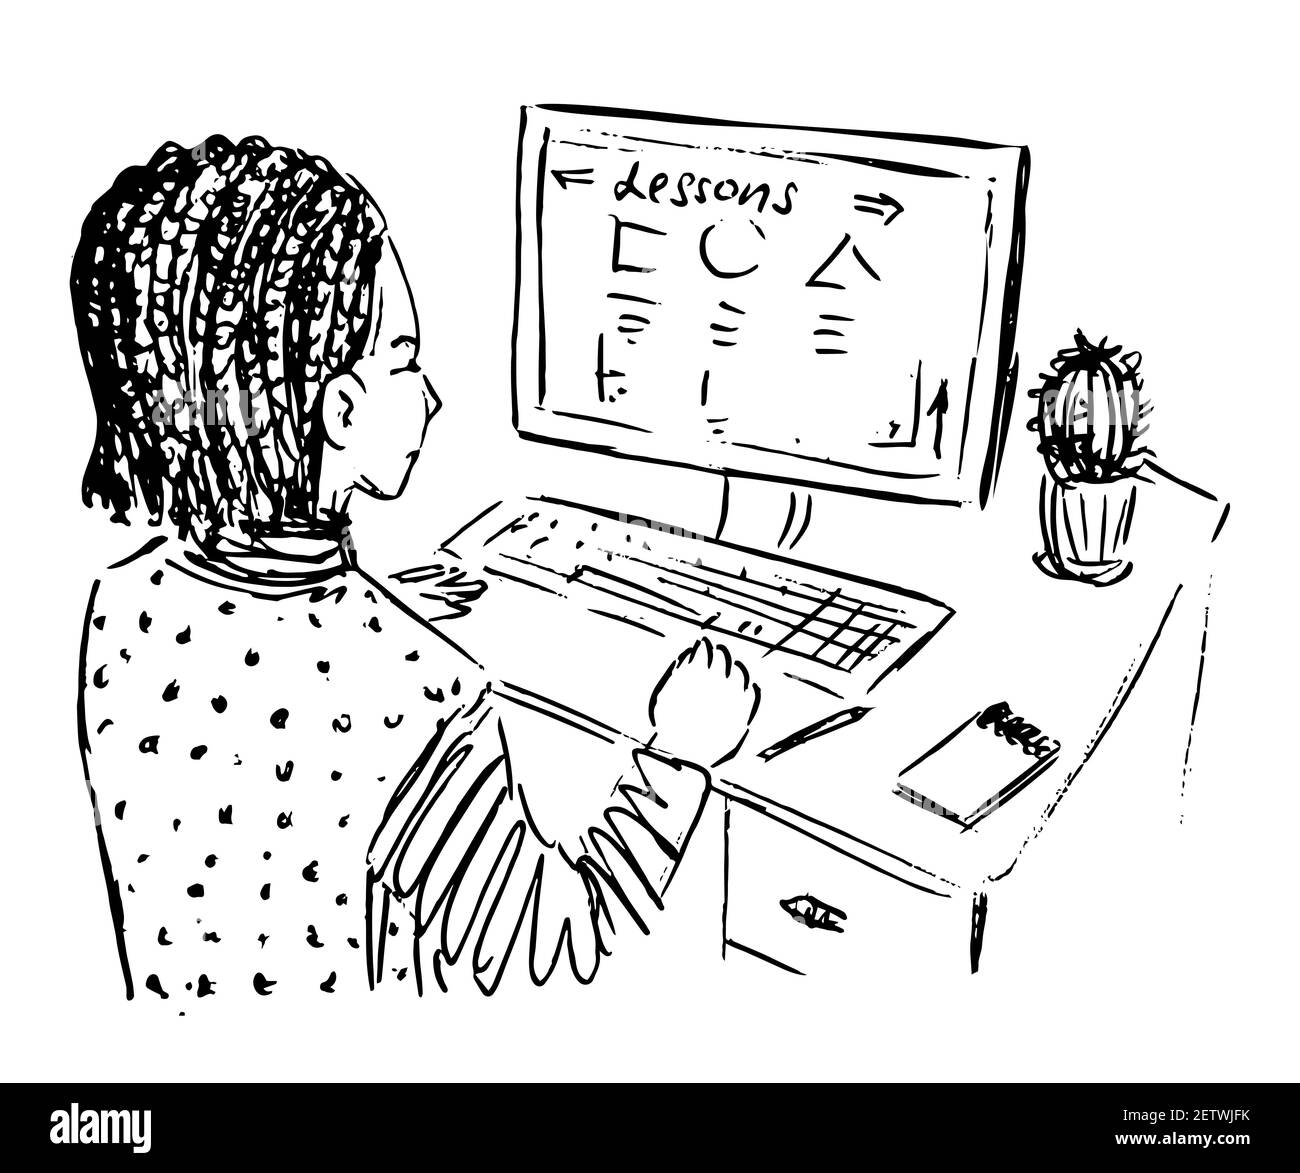 Boy with dreadlocks hairstyle sitting at home and studying lessons online  on computer, table with cactus, back view, hand drawn ink doodle, sketch  Stock Photo - Alamy